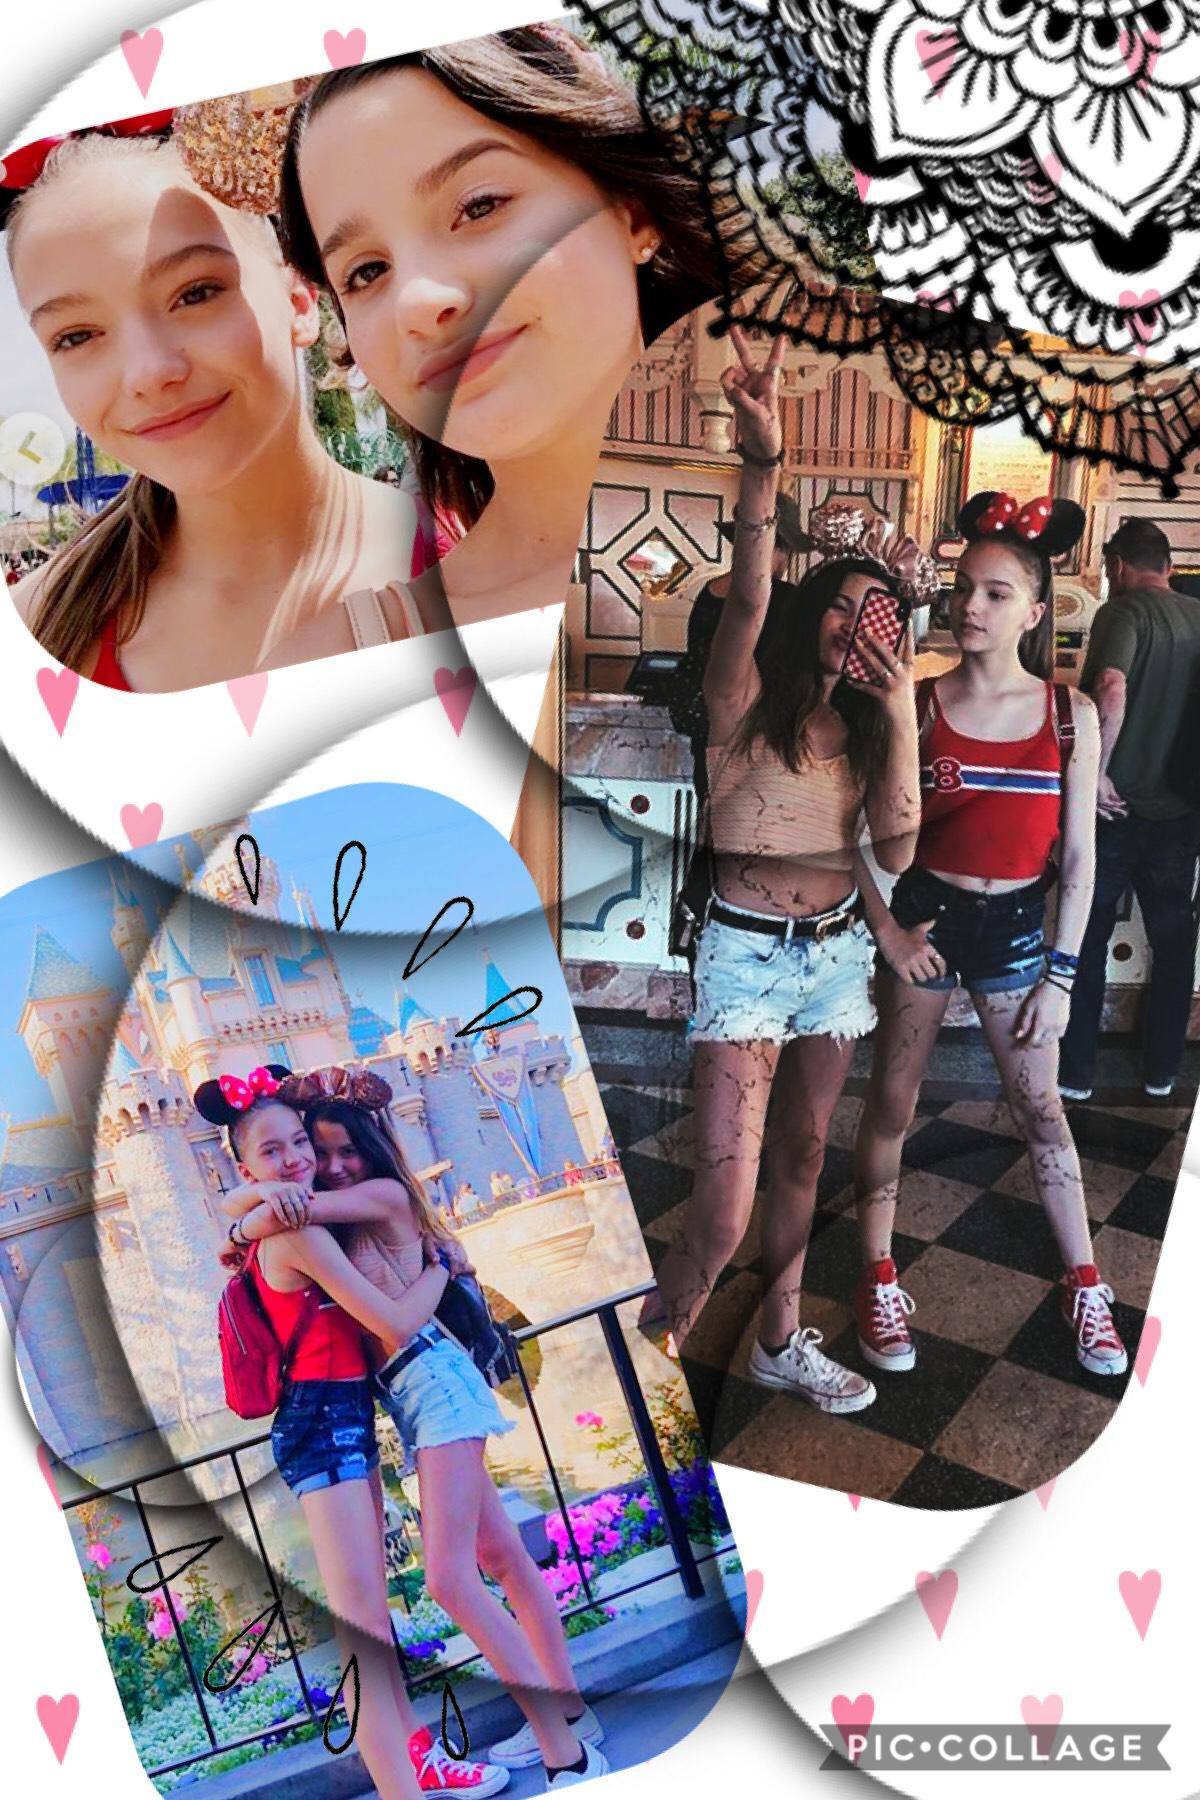 #Jayden!! Thats their ship name!! This is Jayden bartels, besties for evsties!! Youtube, MissJaydenB. Comment!! Do you like wen i edit the collage or not at all?!?